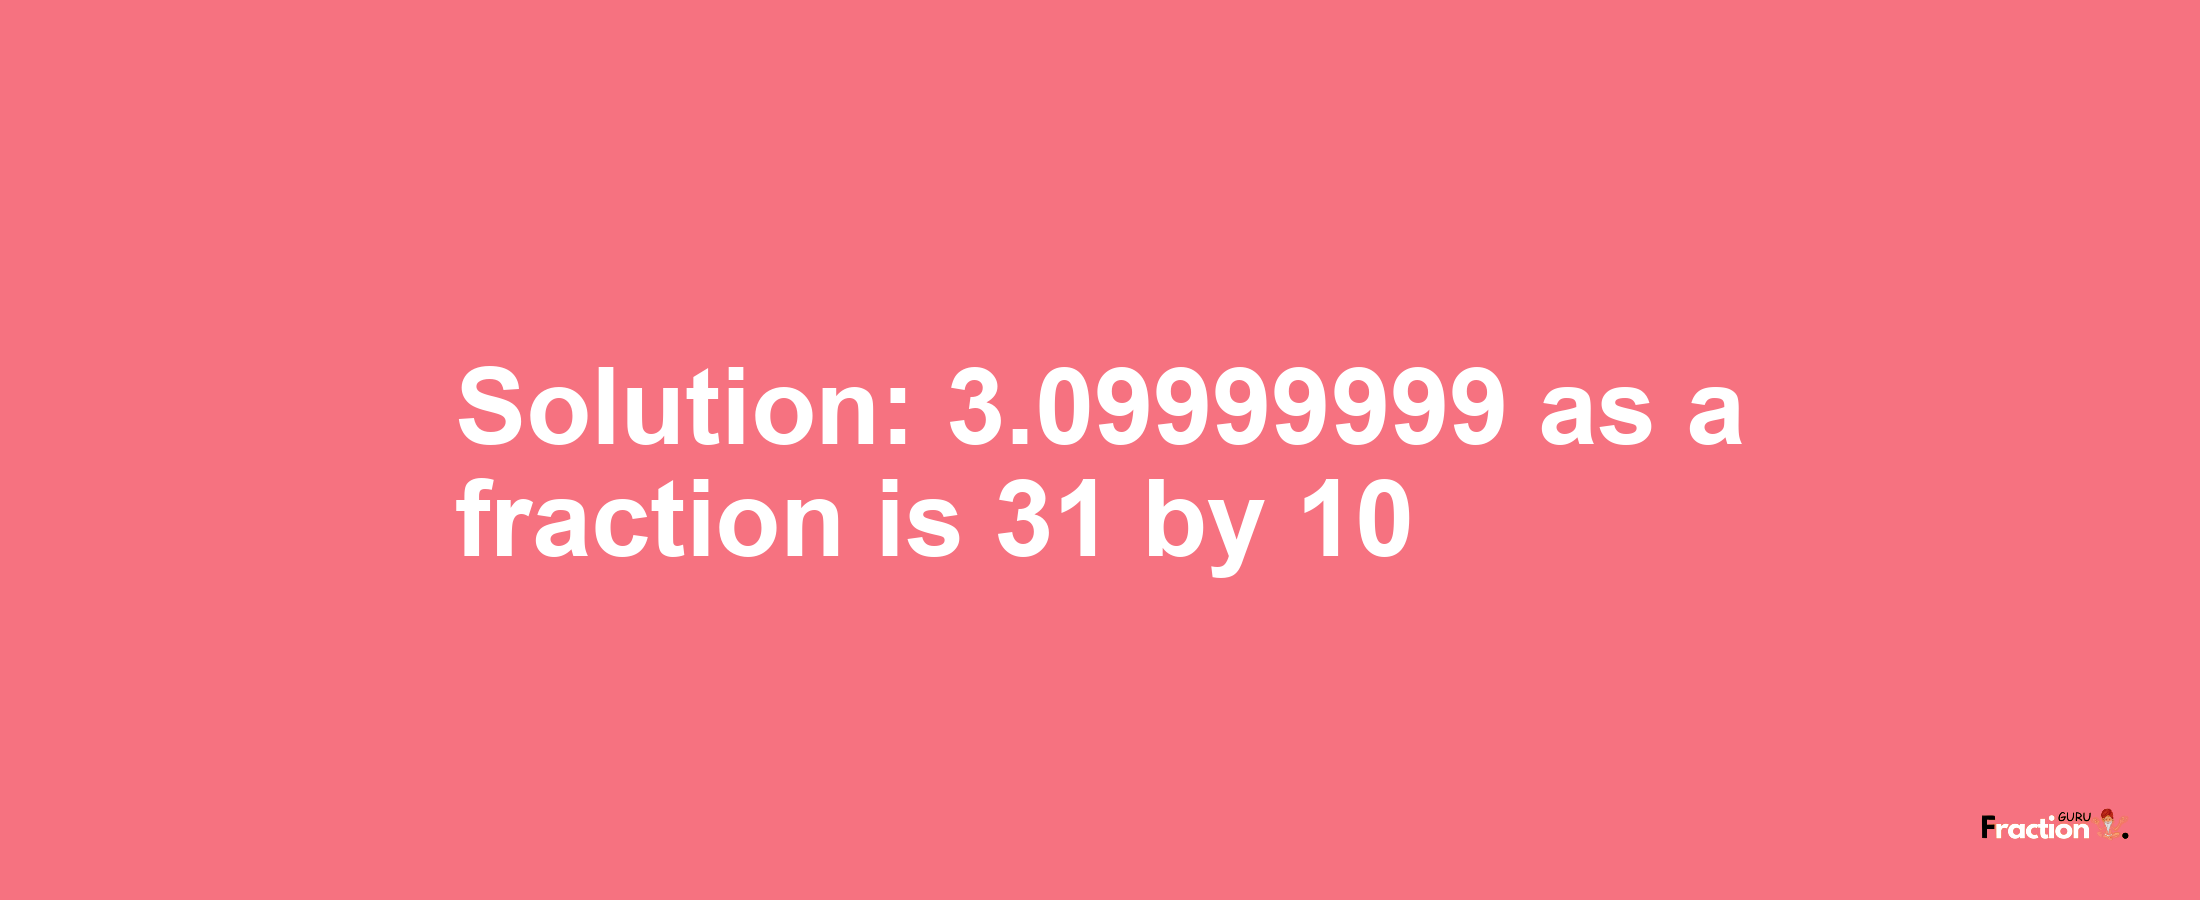 Solution:3.09999999 as a fraction is 31/10